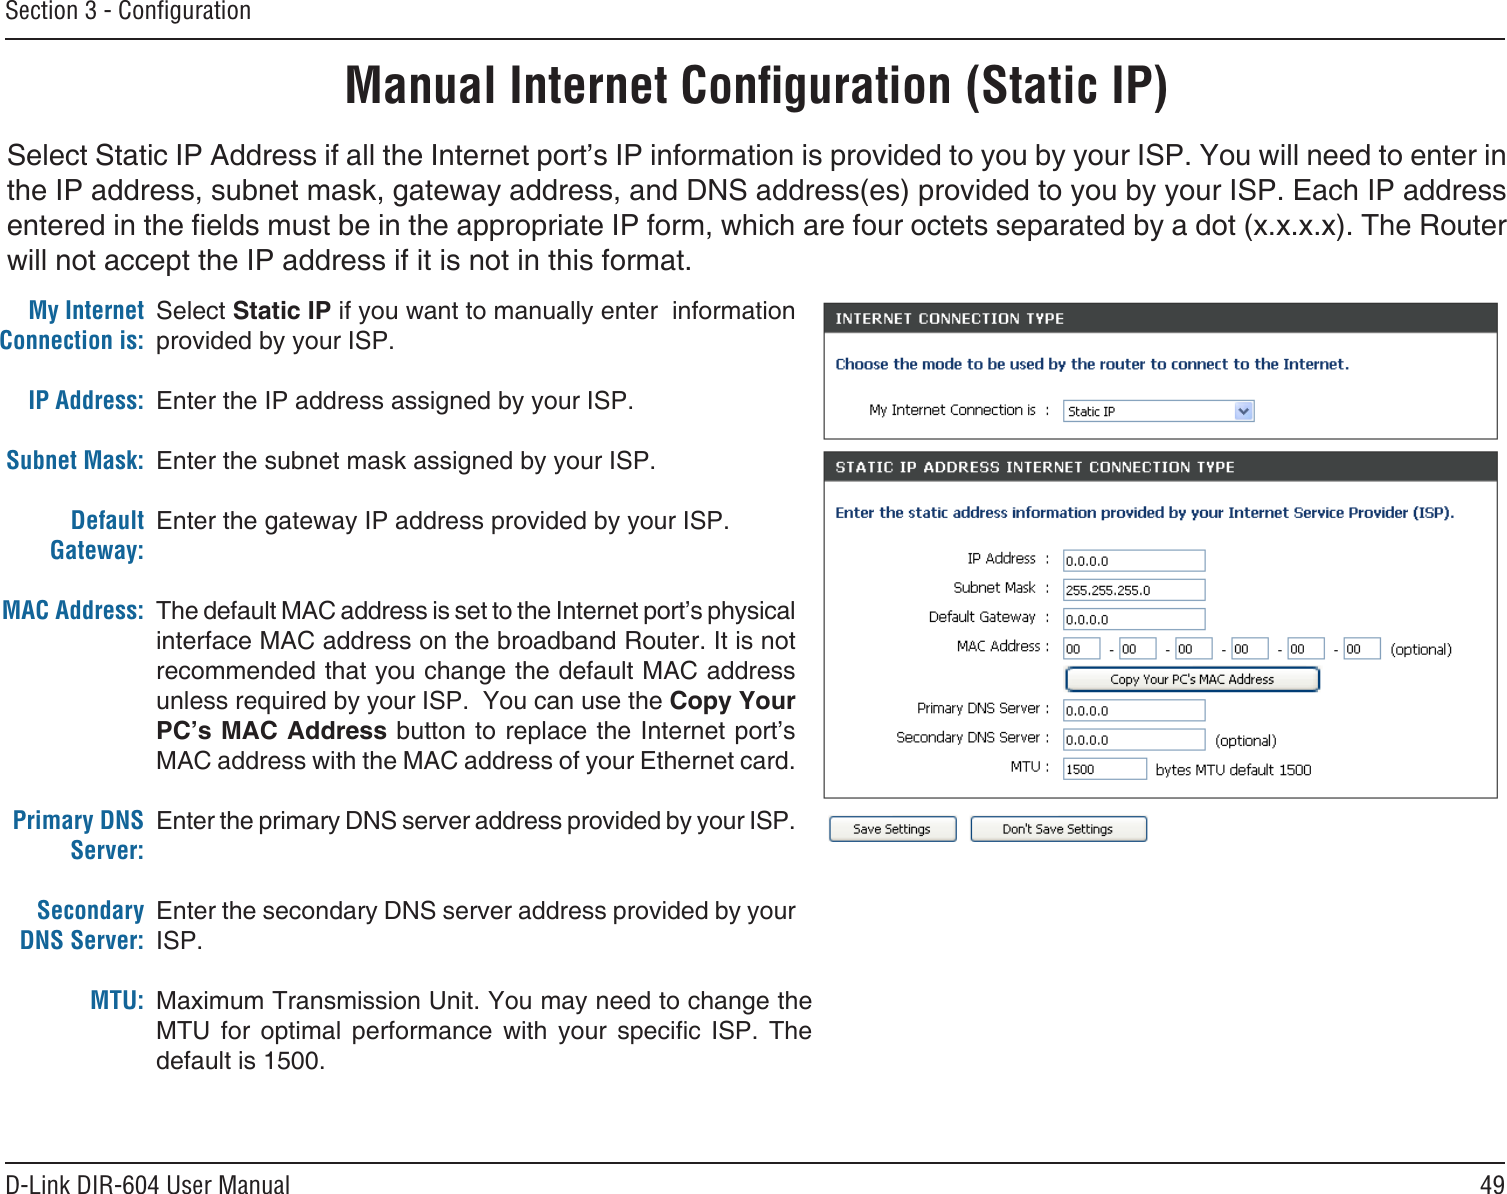 49D-Link DIR-604 User ManualSection 3 - ConﬁgurationSelect Static IP Address if all the Internet port’s IP information is provided to you by your ISP. You will need to enter in the IP address, subnet mask, gateway address, and DNS address(es) provided to you by your ISP. Each IP address entered in the elds must be in the appropriate IP form, which are four octets separated by a dot (x.x.x.x). The Router will not accept the IP address if it is not in this format. Manual Internet Conﬁguration (Static IP)Select Static IP if you want to manually enter  information provided by your ISP. Enter the IP address assigned by your ISP.Enter the subnet mask assigned by your ISP.Enter the gateway IP address provided by your ISP.The default MAC address is set to the Internet port’s physical interface MAC address on the broadband Router. It is not recommended that you change the default MAC address unless required by your ISP.  You can use the Copy Your PC’s MAC Address button to replace the Internet port’s MAC address with the MAC address of your Ethernet card.Enter the primary DNS server address provided by your ISP.Enter the secondary DNS server address provided by your ISP.Maximum Transmission Unit. You may need to change the MTU  for  optimal  performance  with  your  specic  ISP.  The default is 1500.My Internet Connection is:IP Address:Subnet Mask:Default Gateway:MAC Address:Primary DNS Server:Secondary DNS Server:MTU: